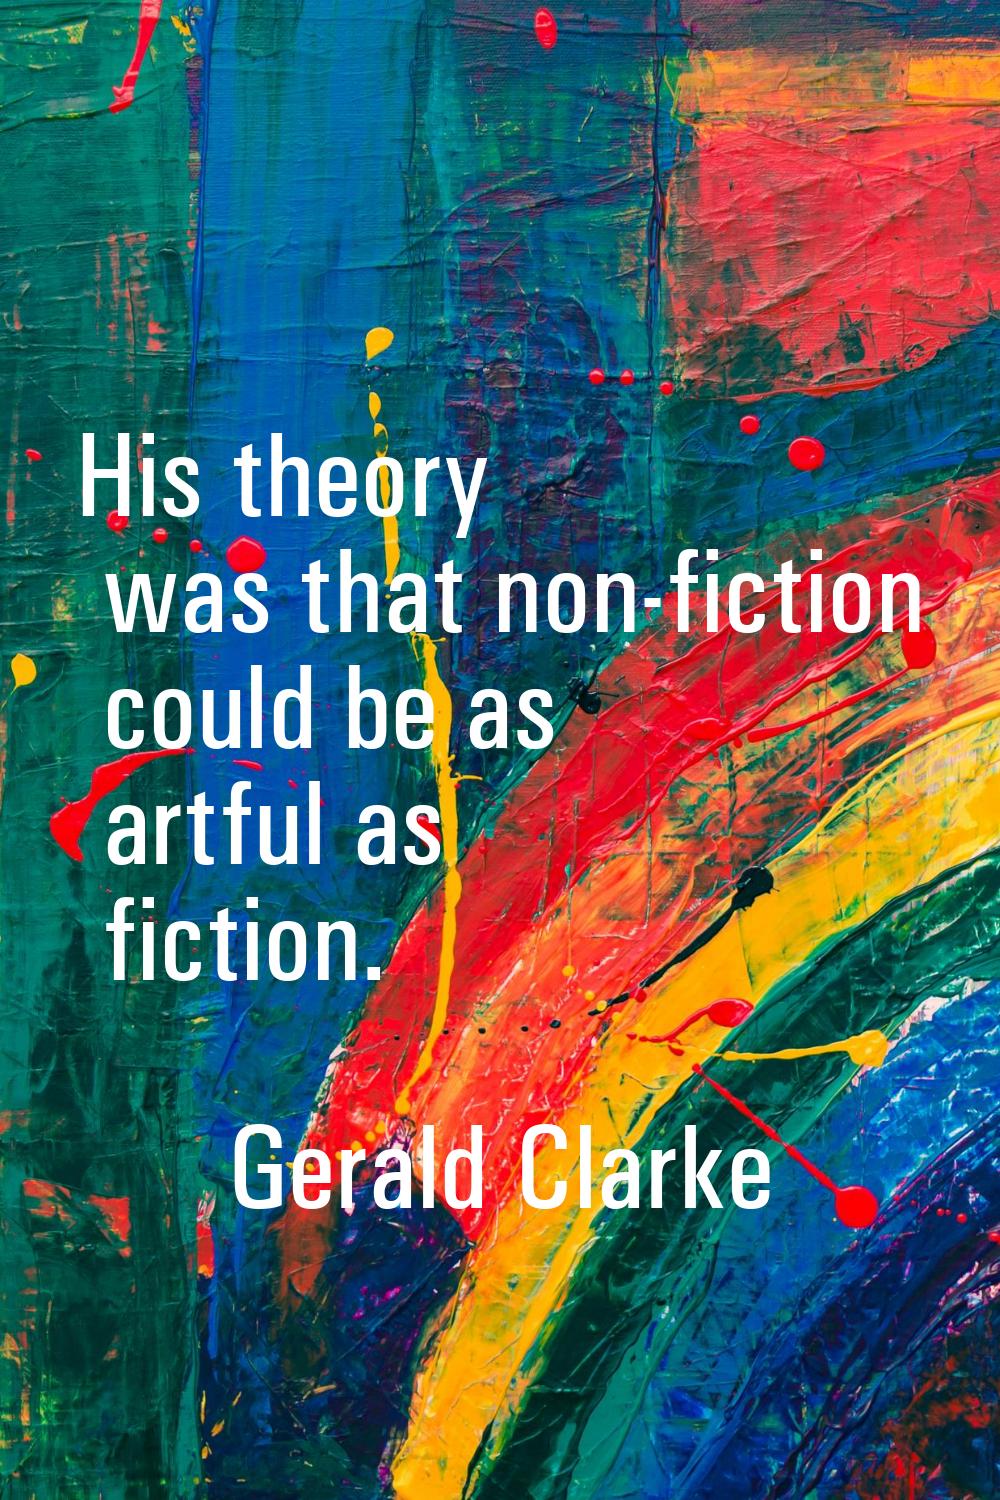 His theory was that non-fiction could be as artful as fiction.